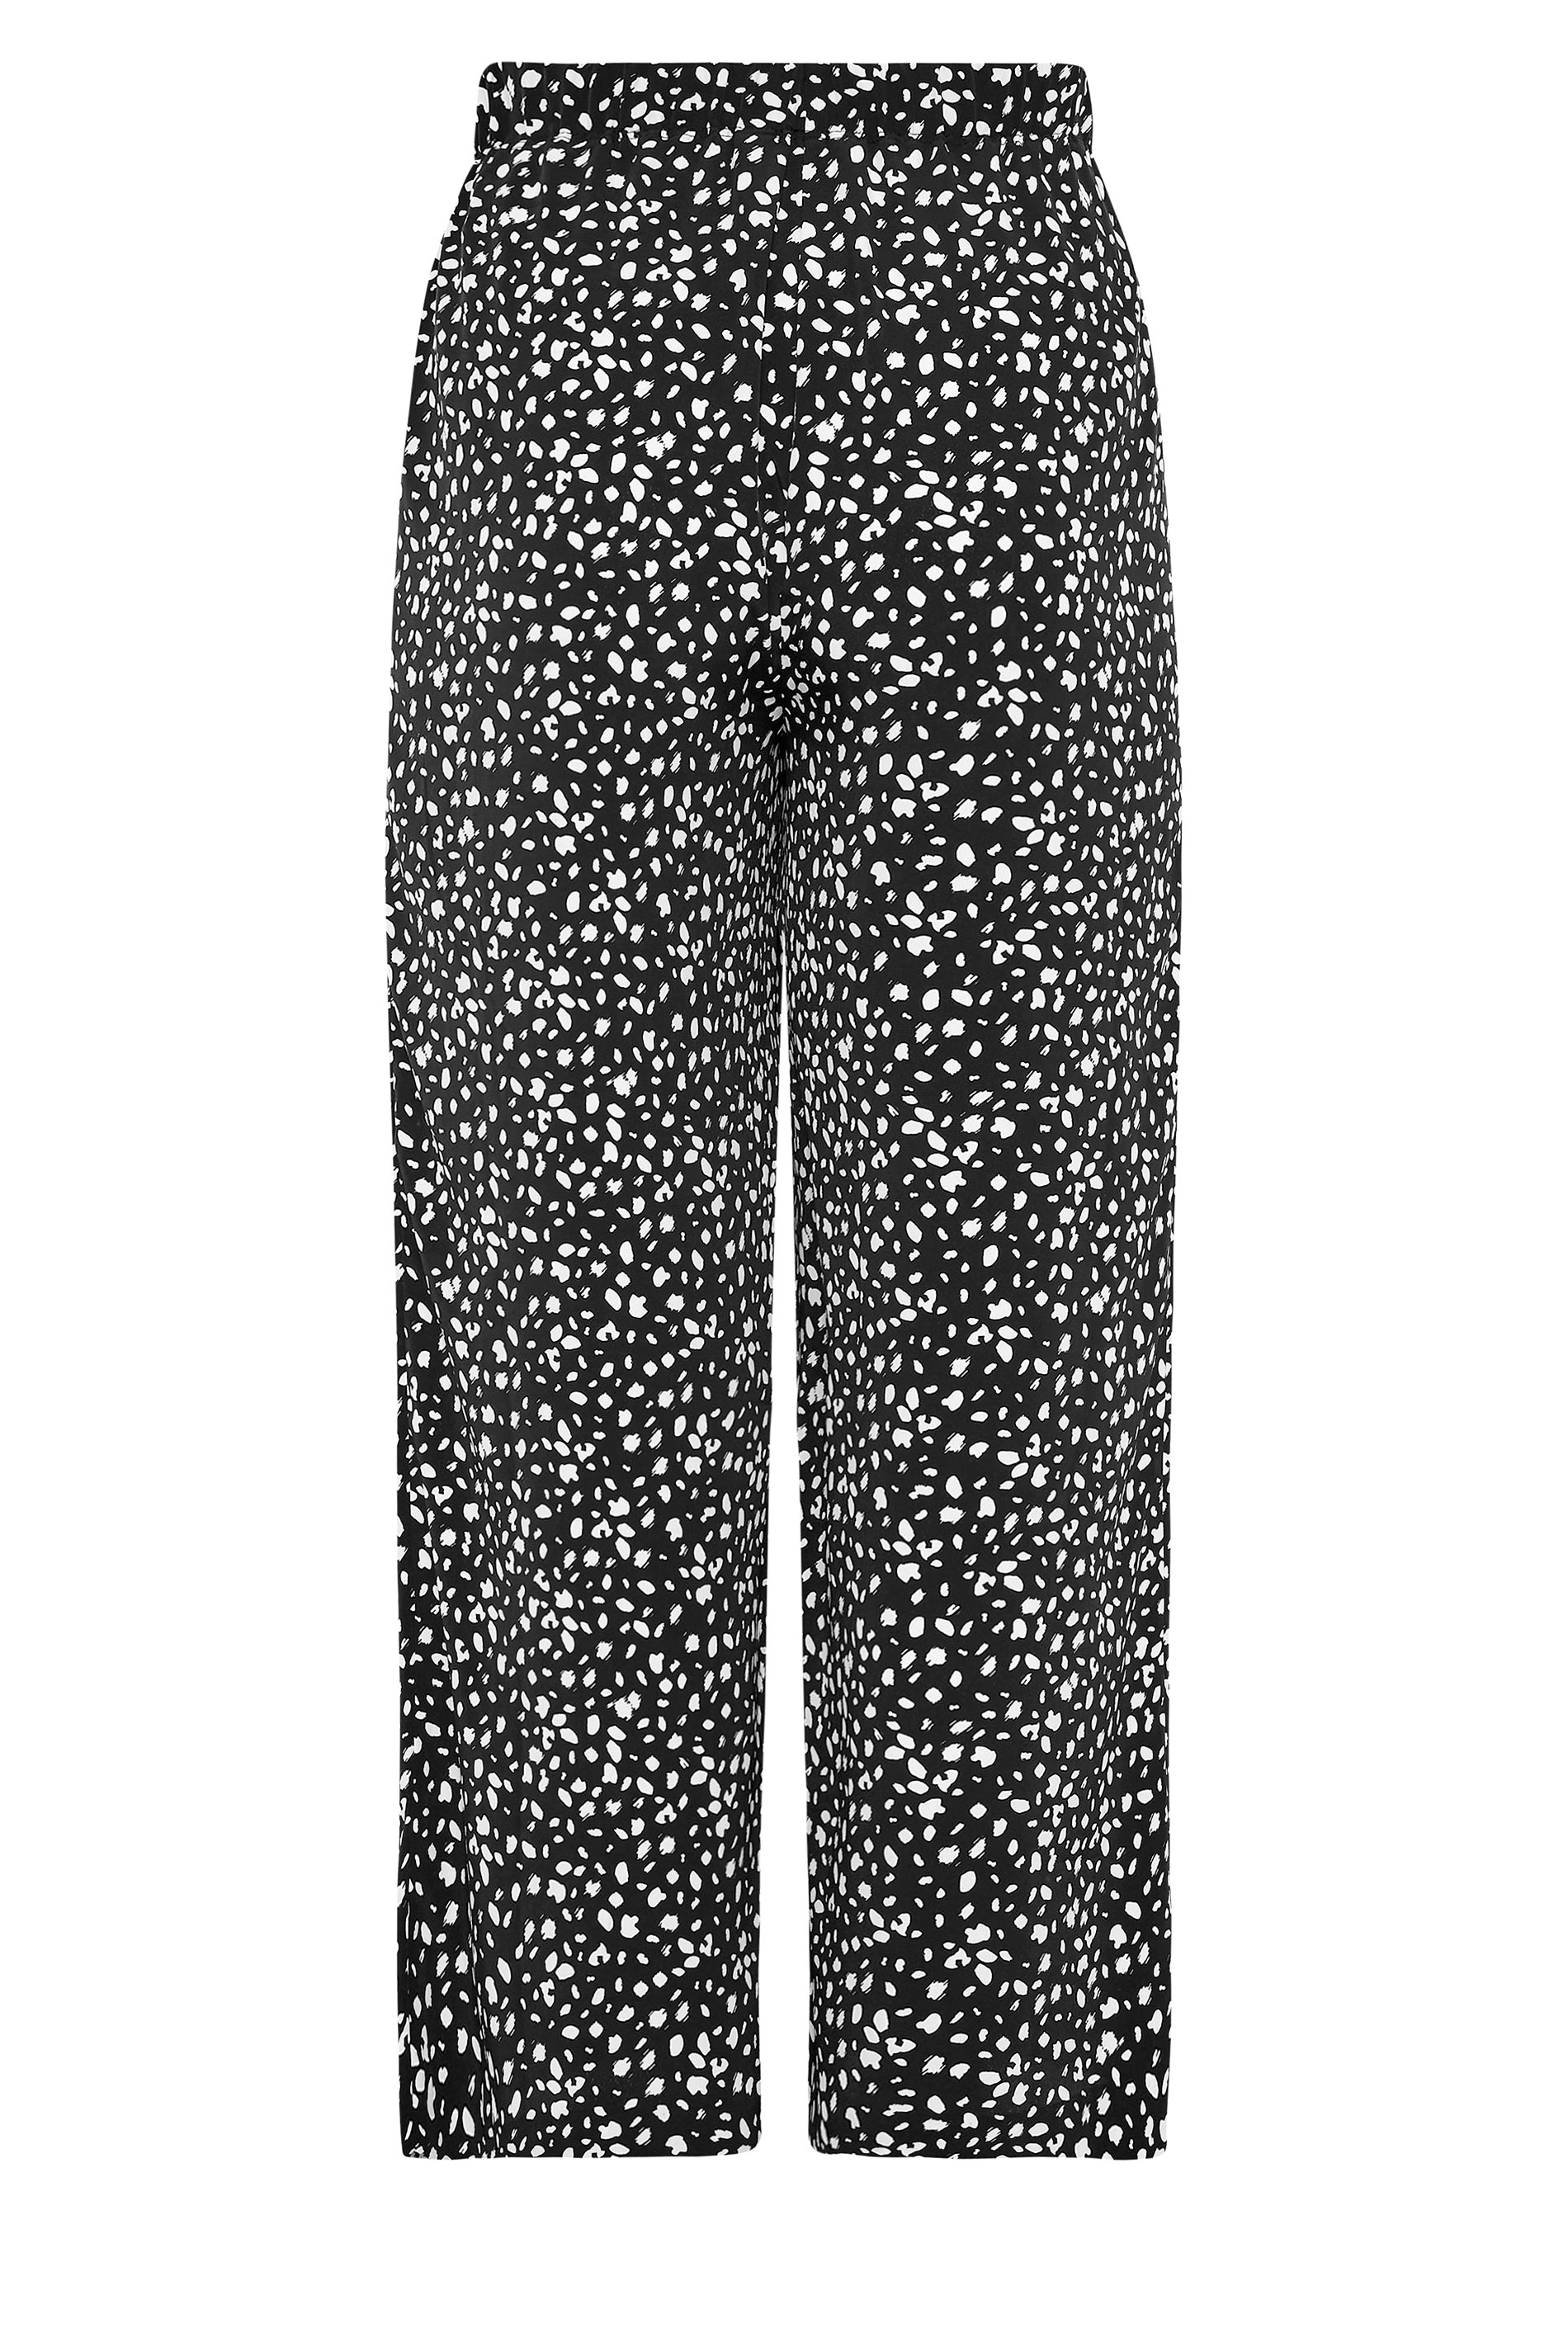 Plus Size THE LIMITED EDIT Black Speckled Print Wide Leg Trousers ...